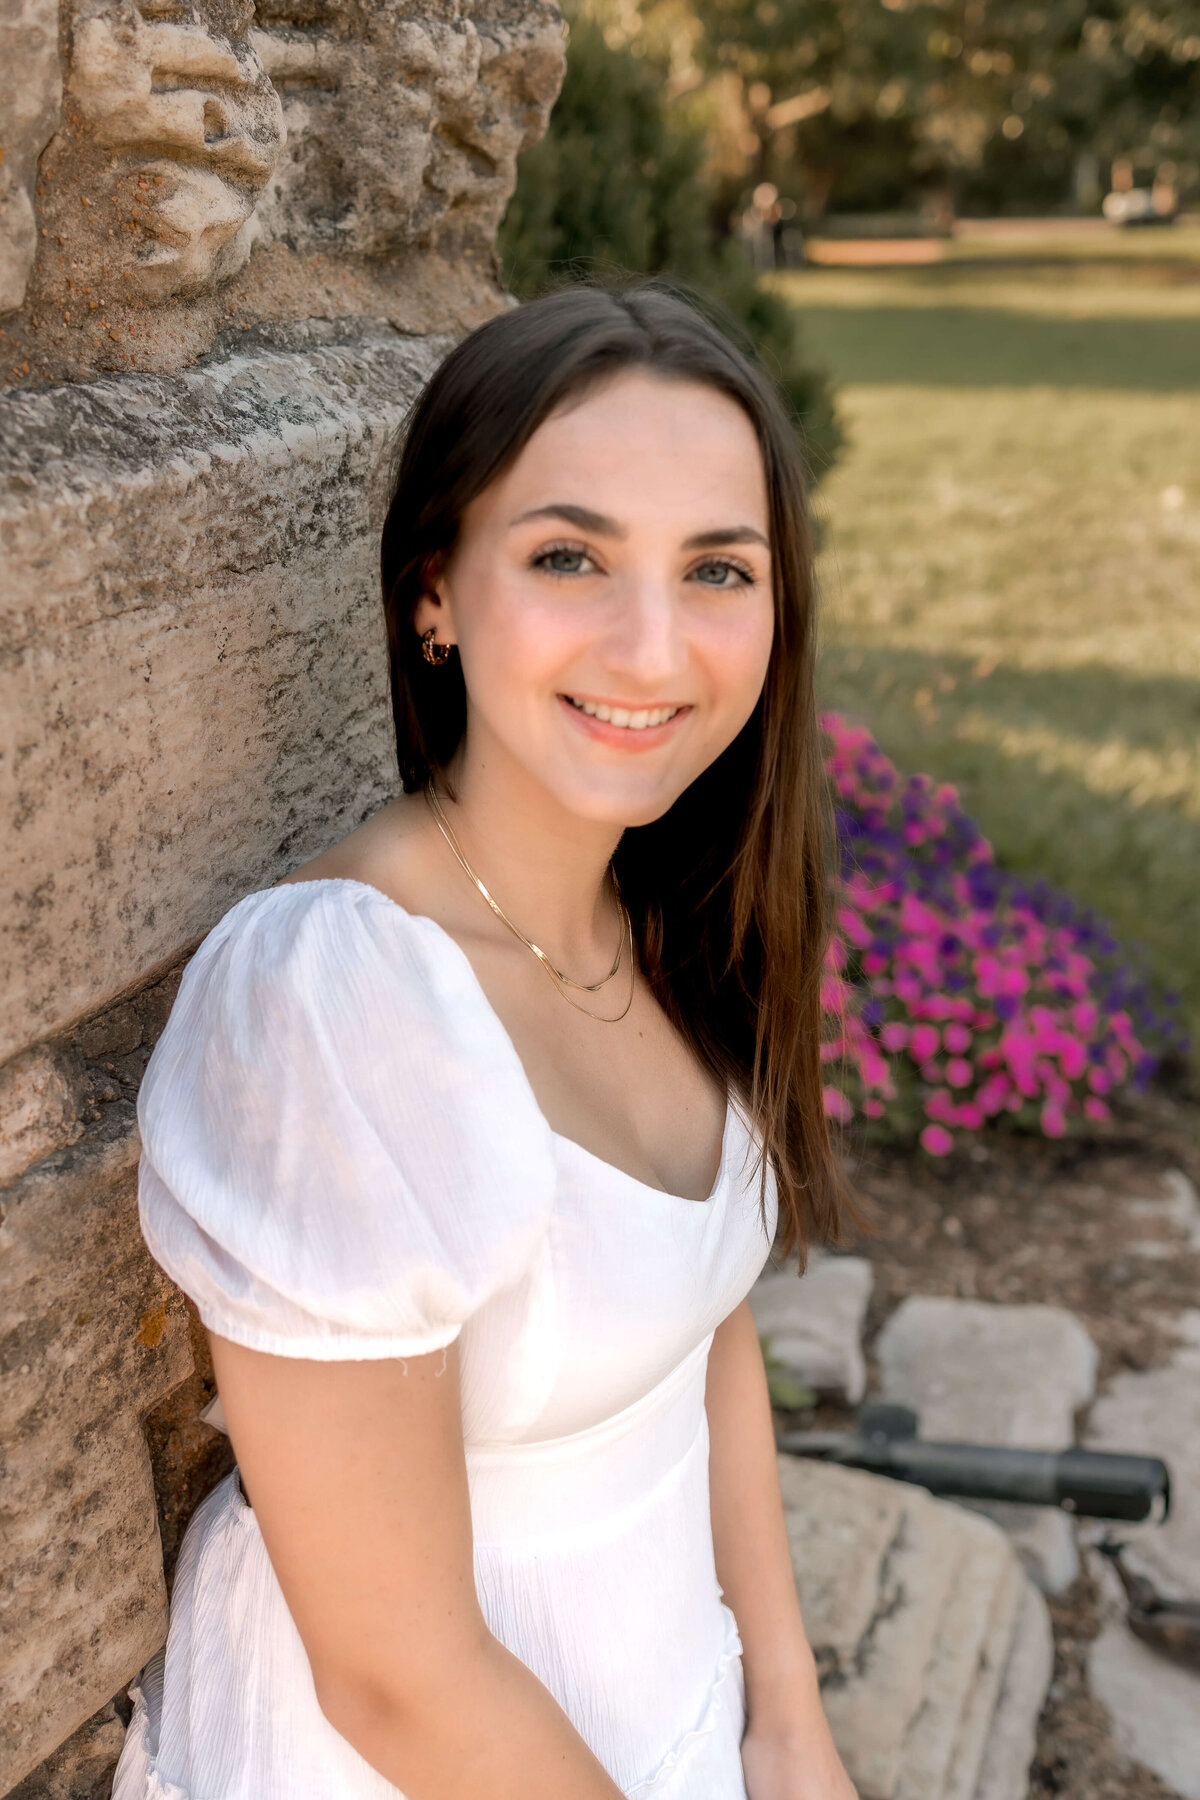 beautiful brown haired girl posing for her senior photos at tower grove park, leaning against a stone wall.